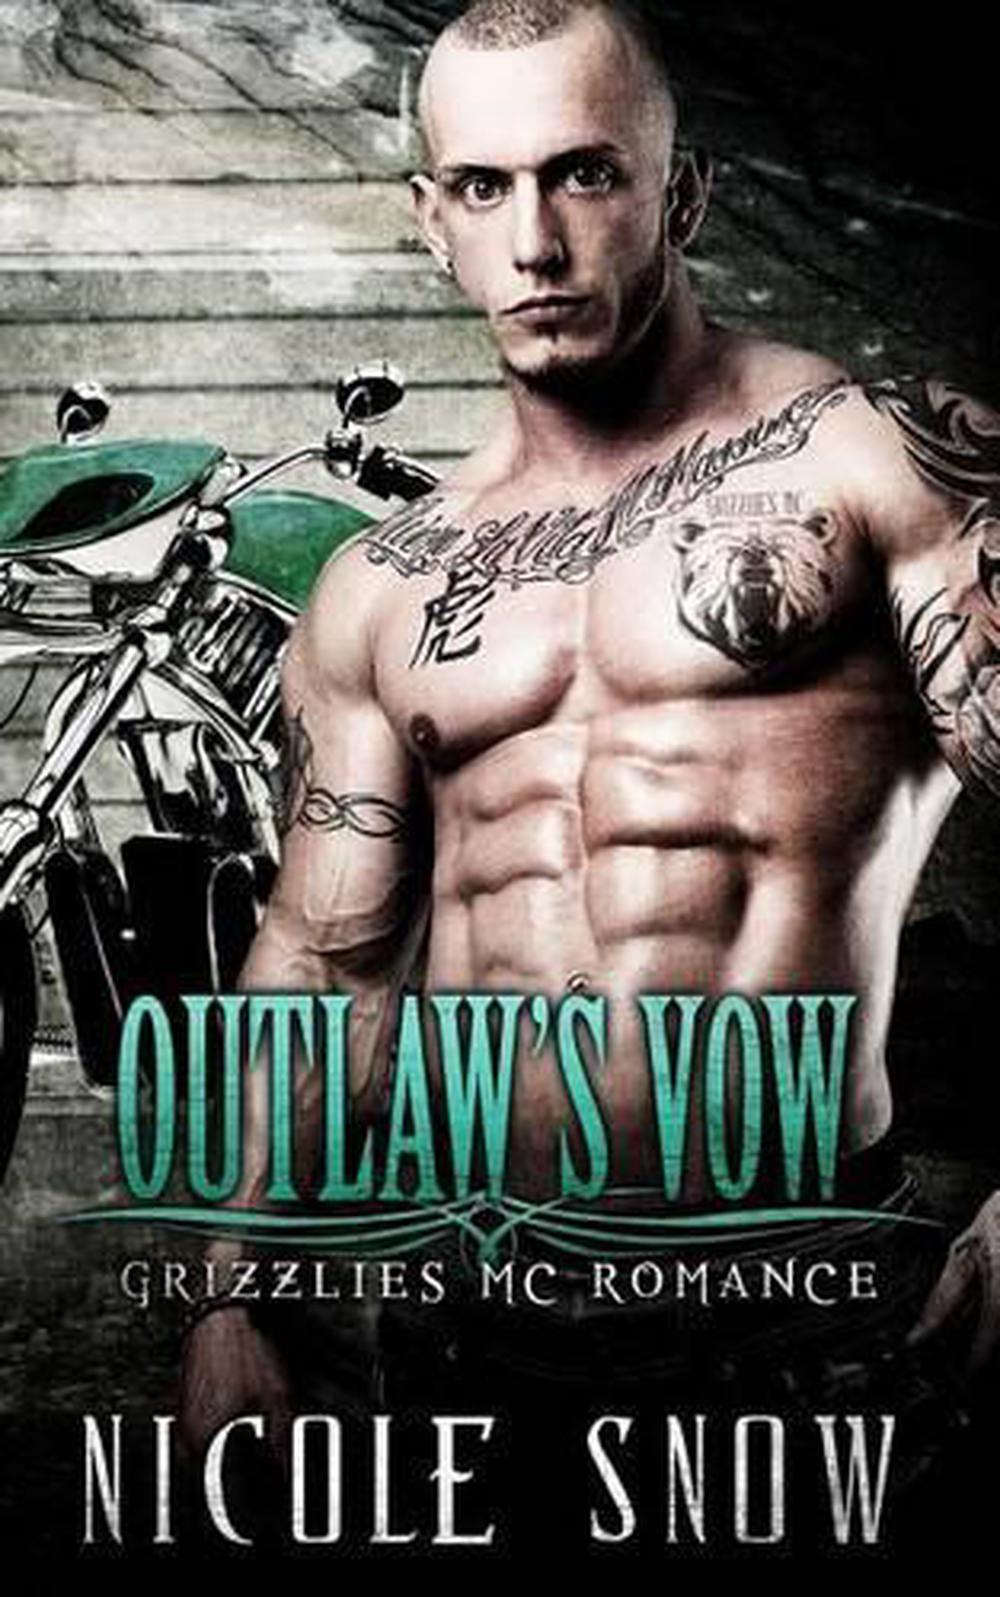 romantic outlaws